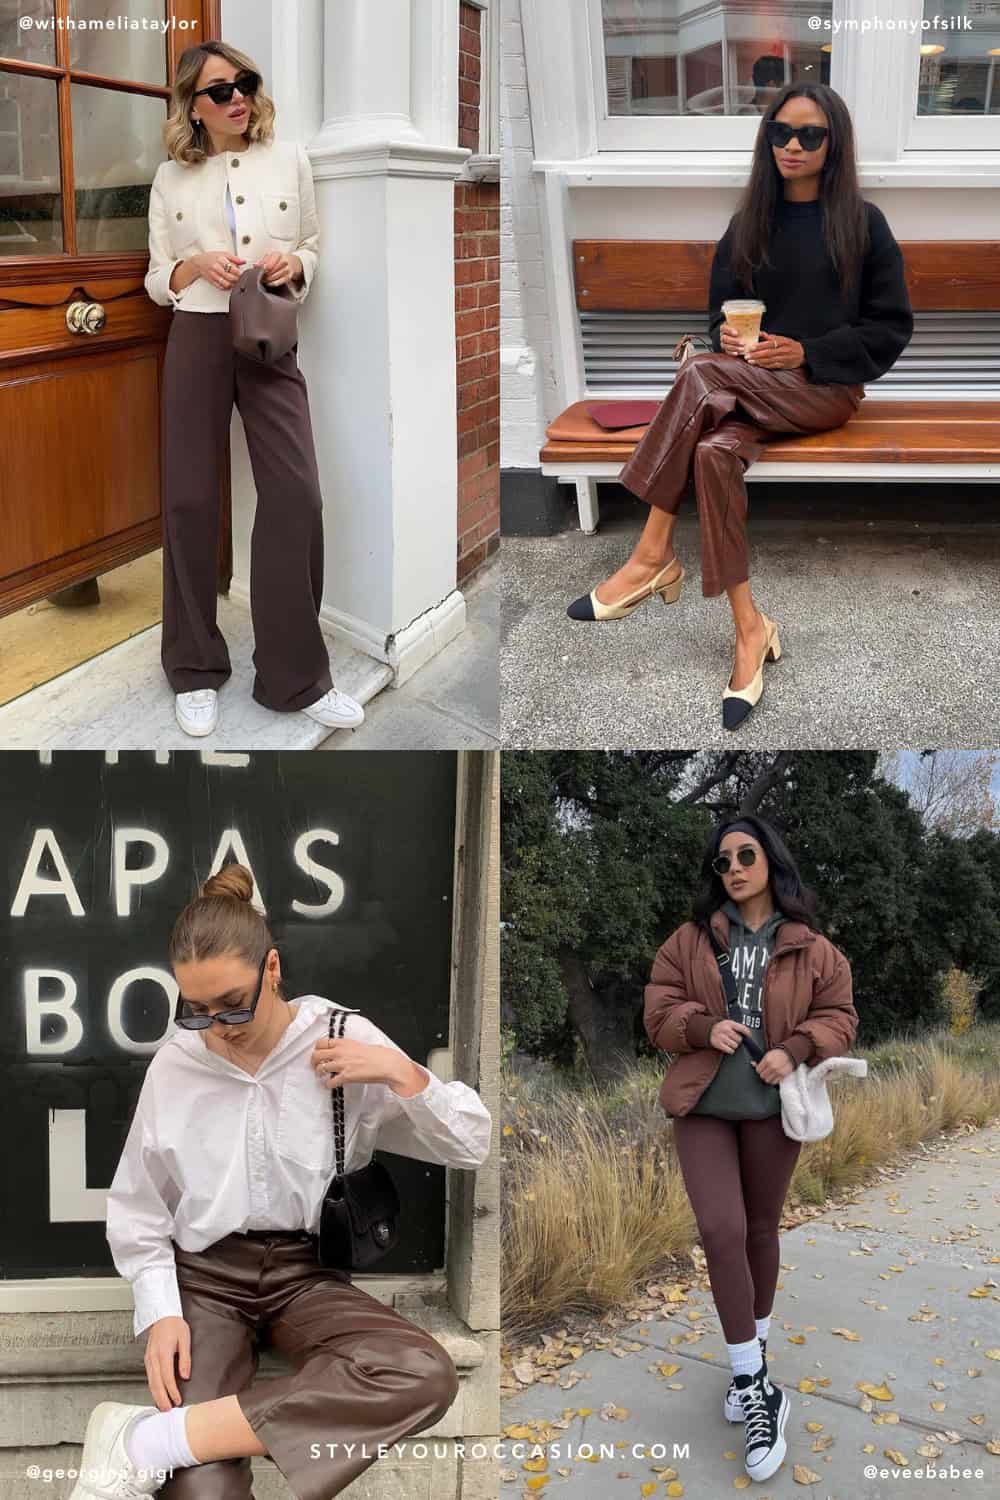 collage of four women wearing stylish outfits with brown pants